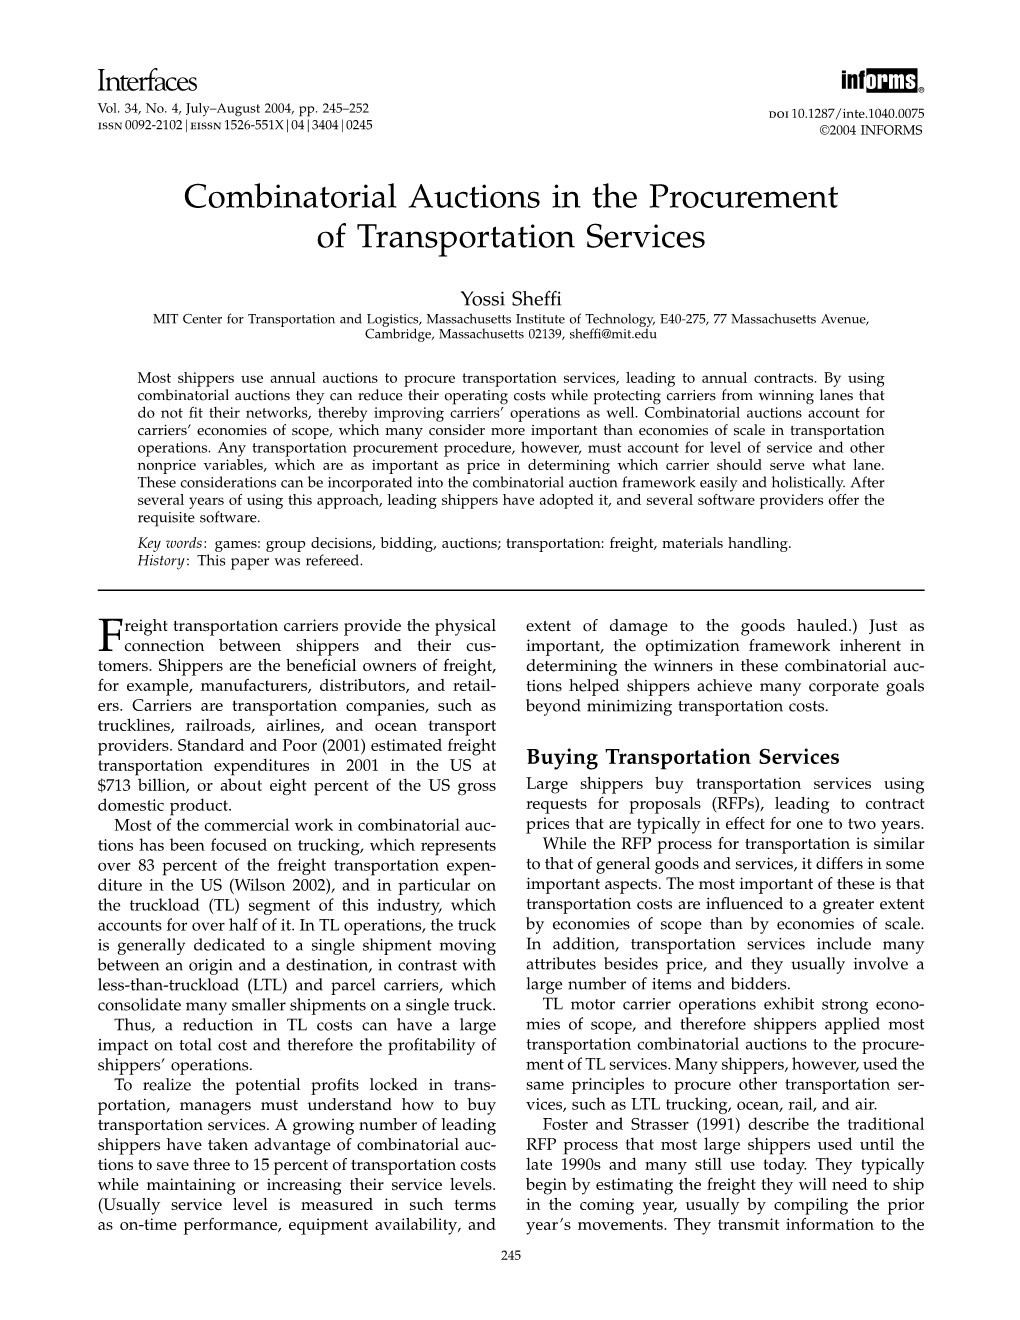 Combinatorial Auctions in the Procurement of Transportation Services